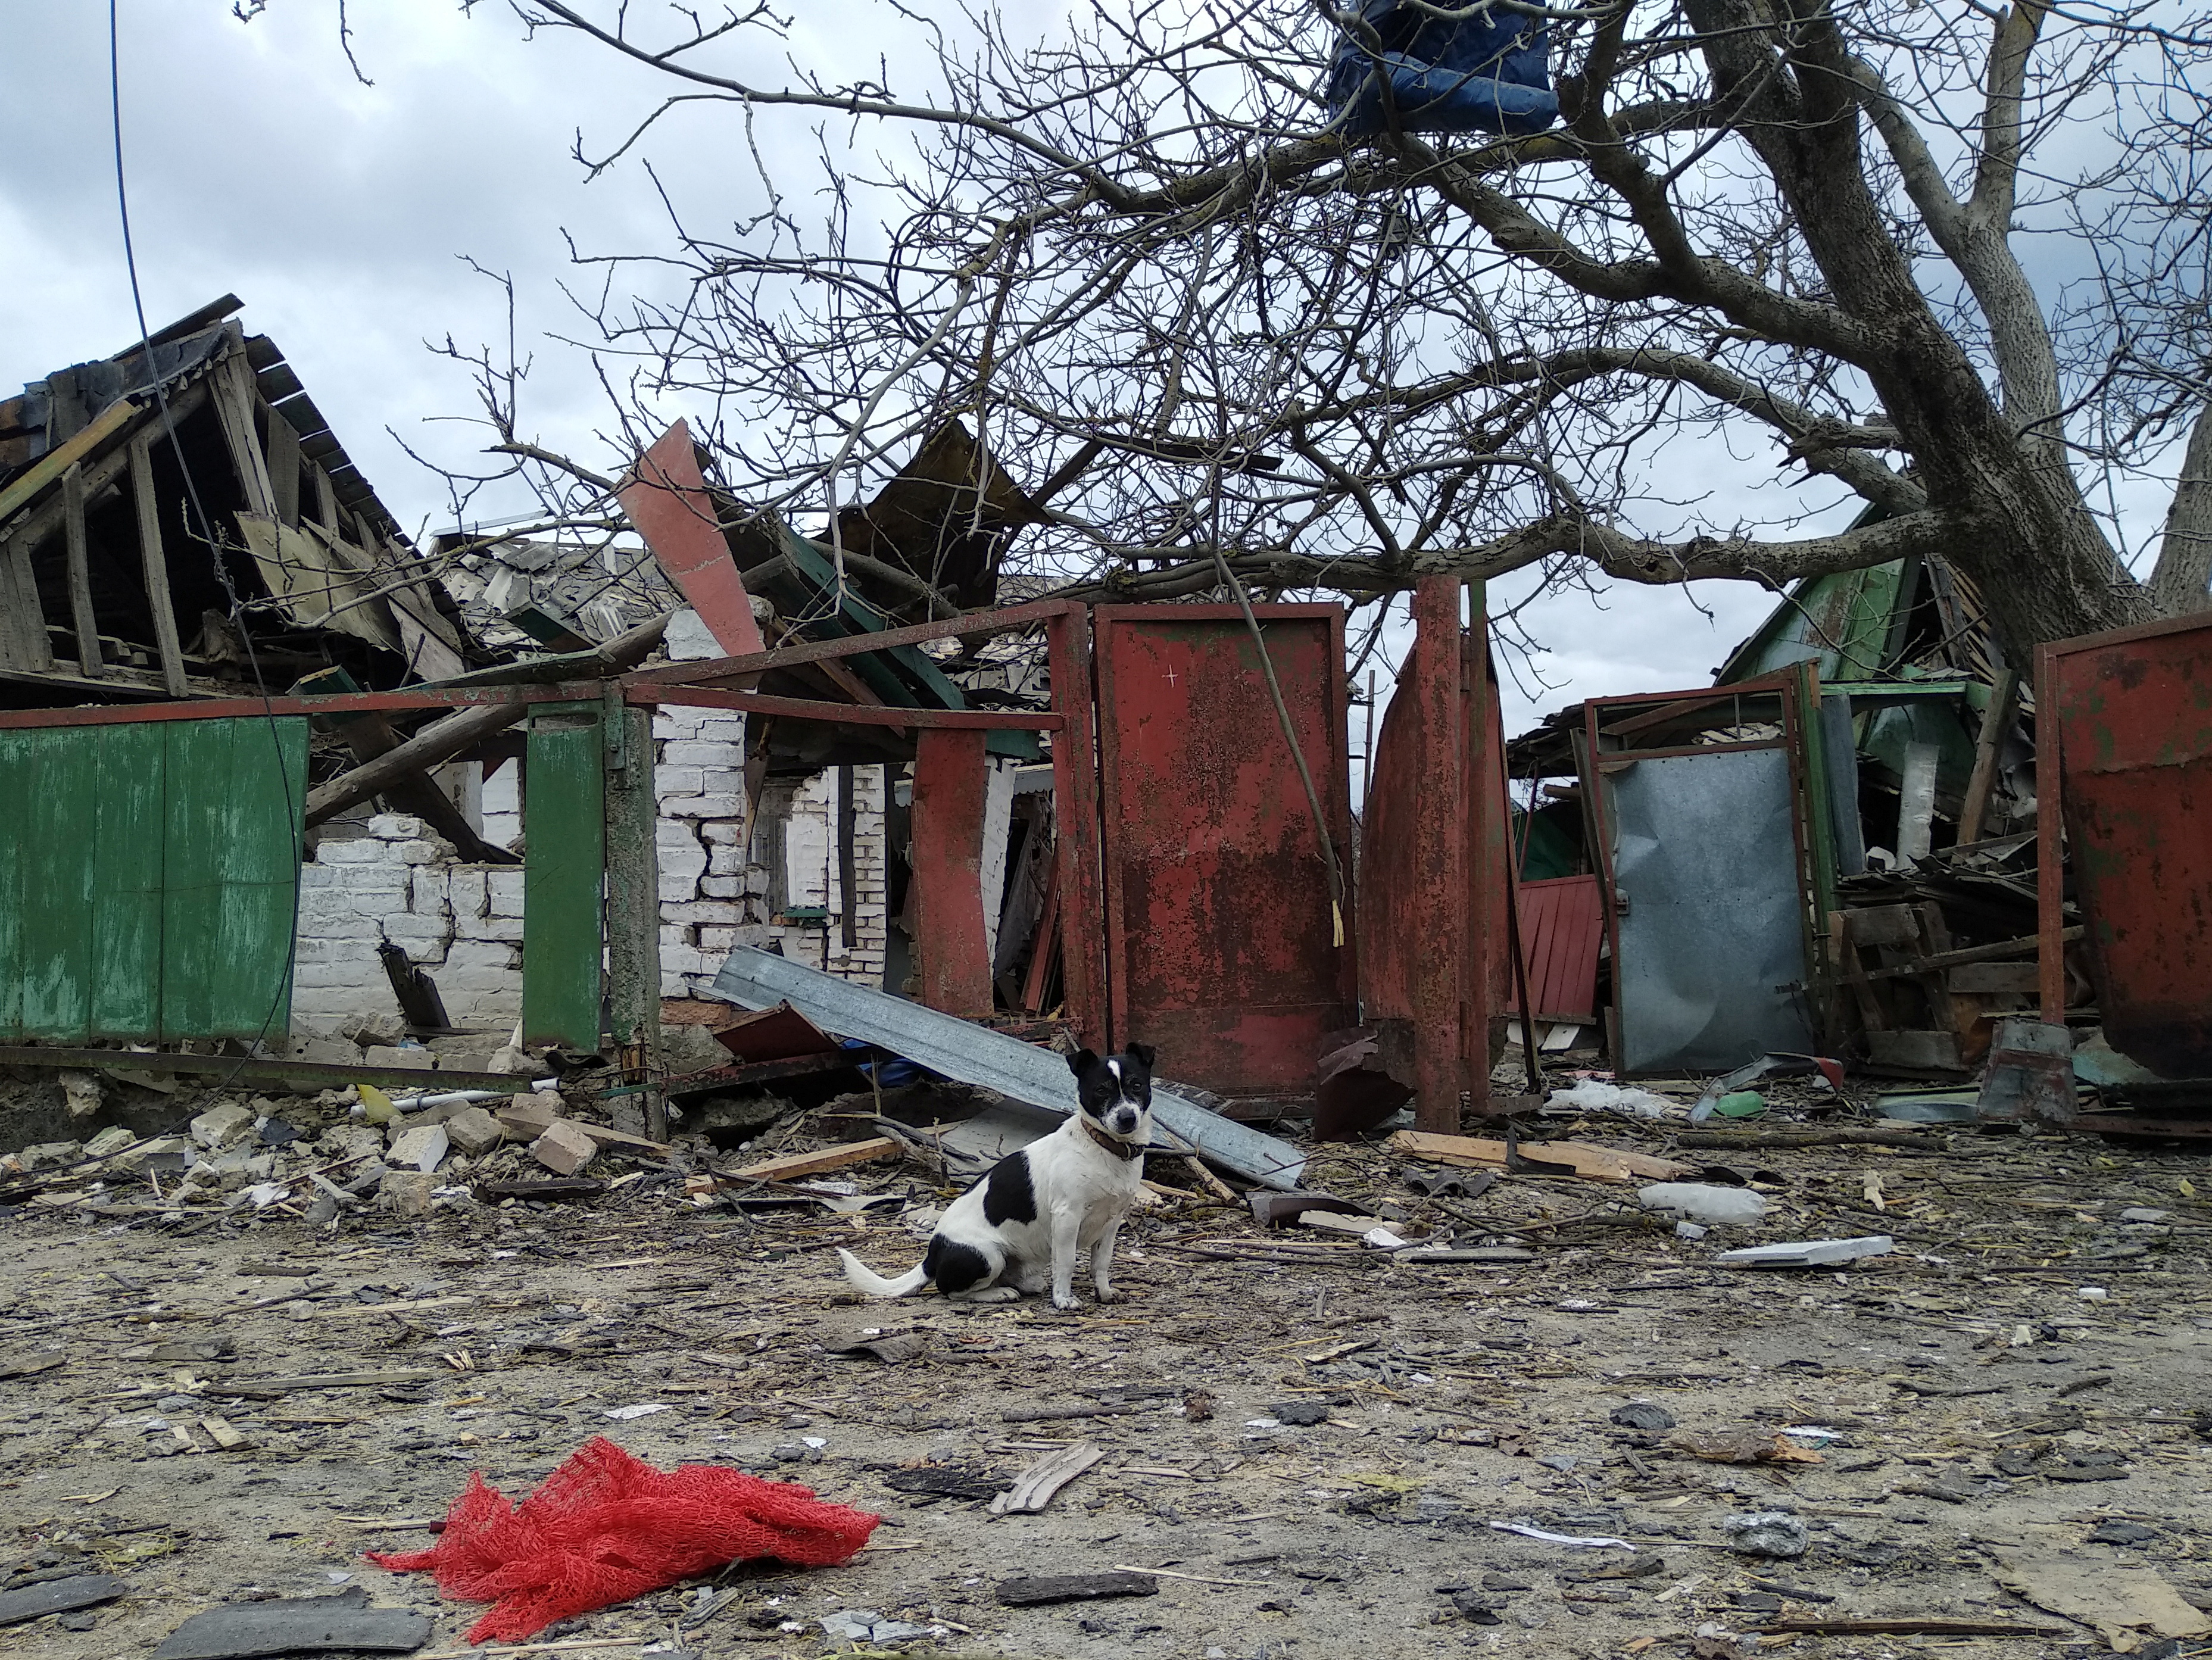 A dog is seen in front of a house damaged by shelling in the Kyiv region